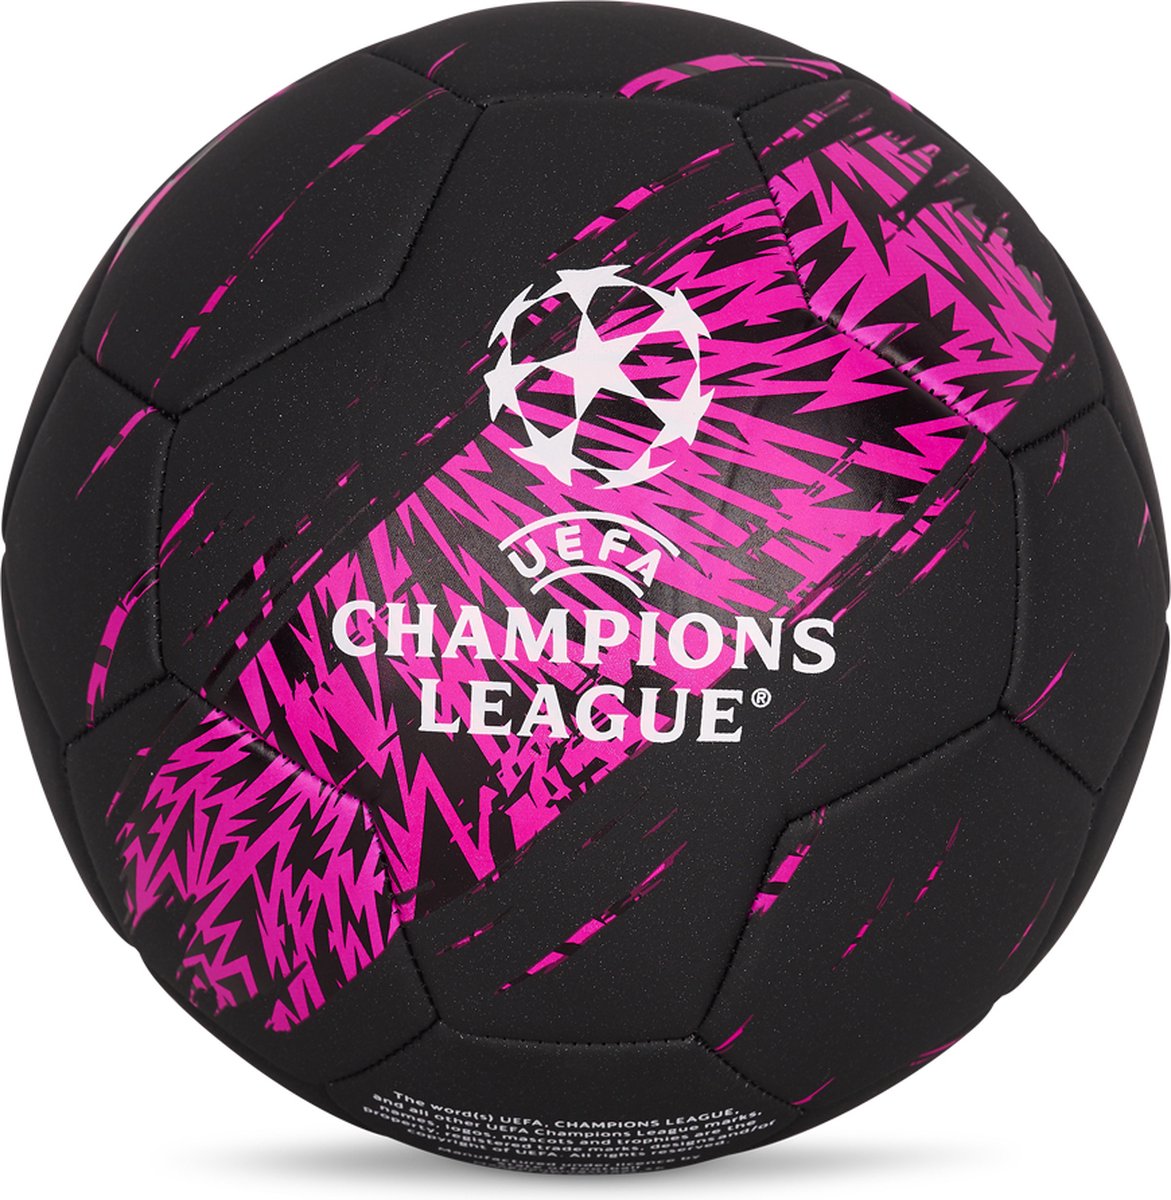 Champions League voetbal black pearl - T5 - maat T5